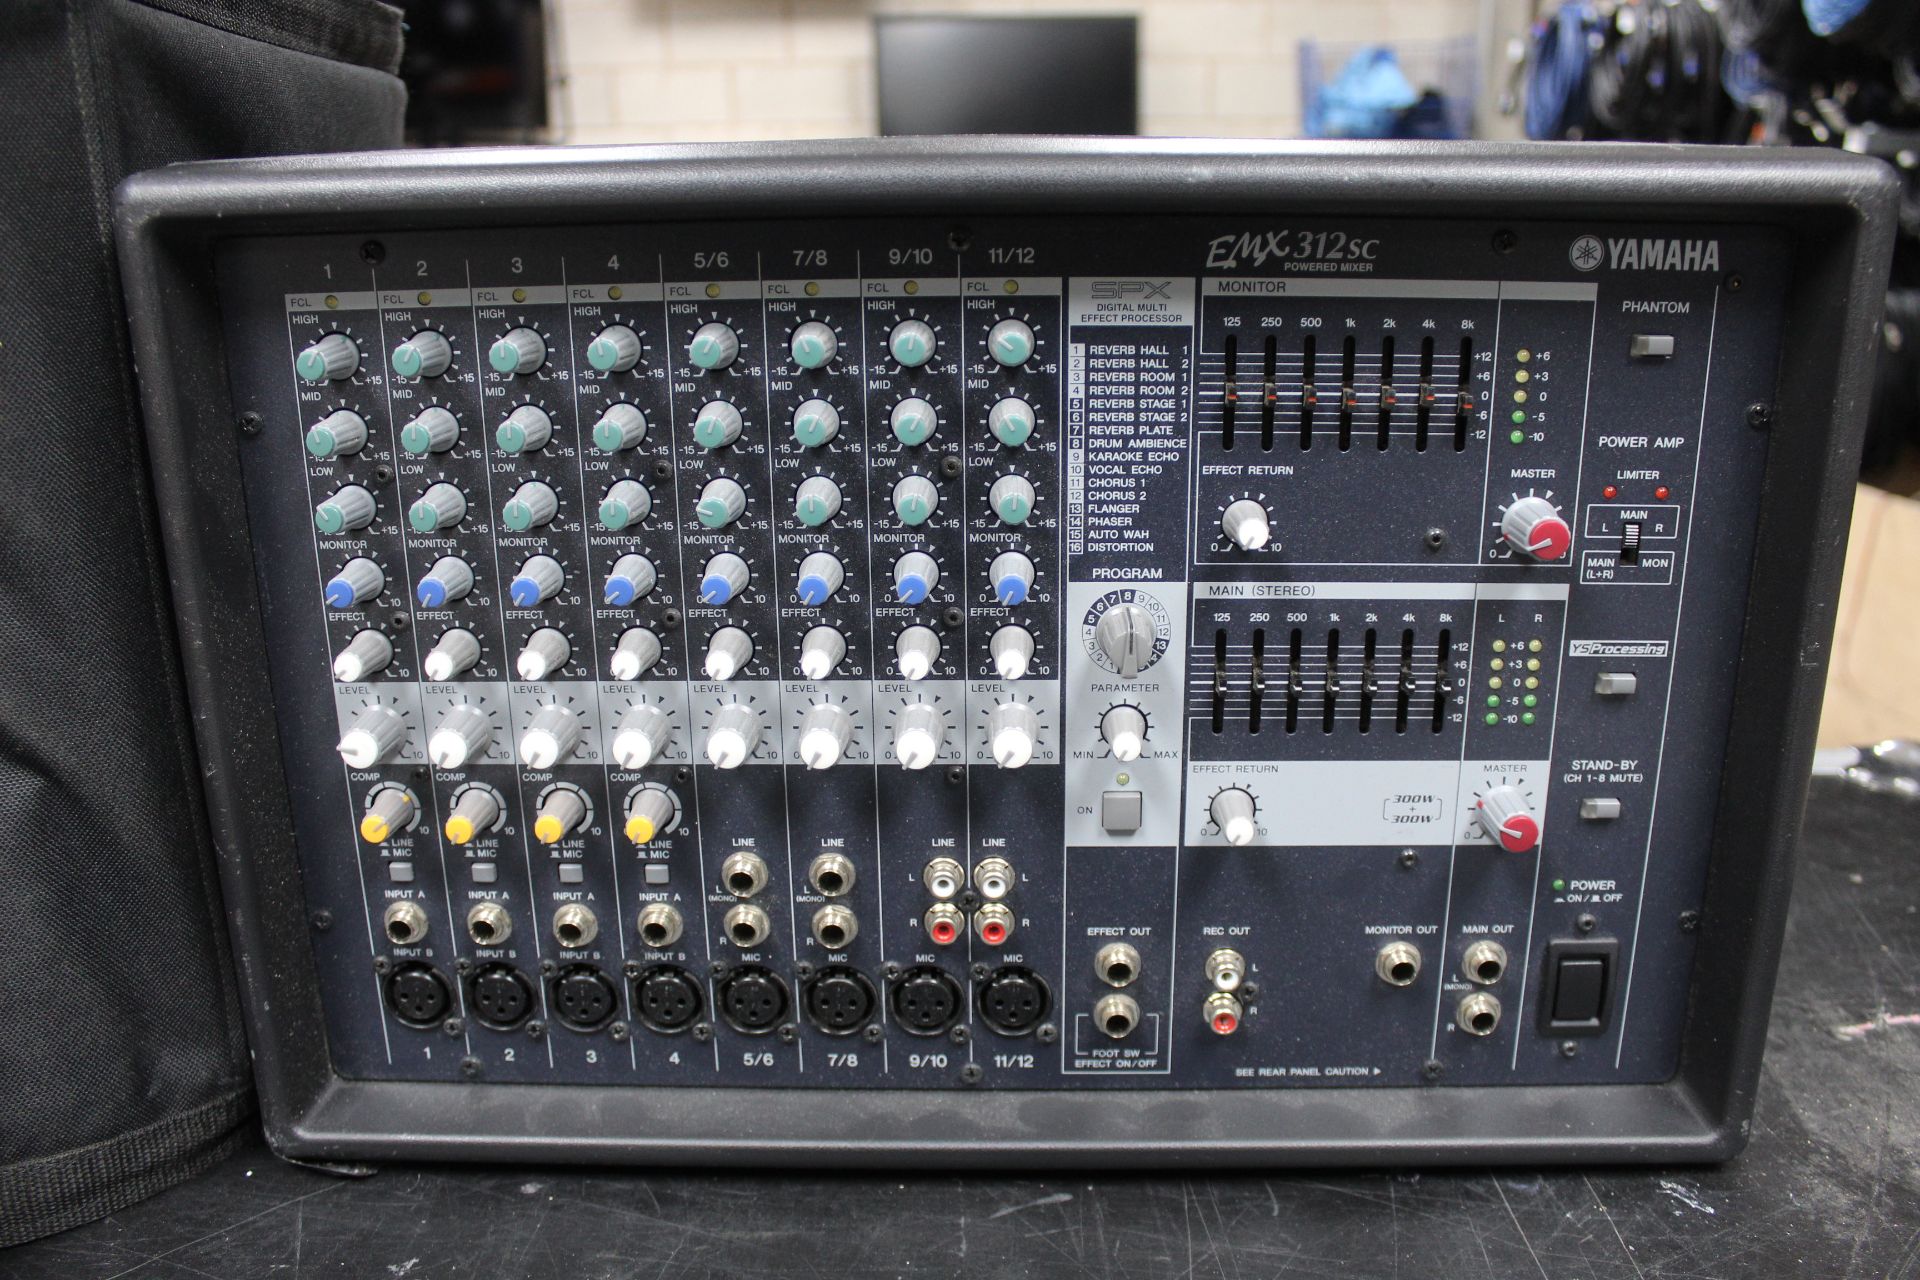 Yamaha EMX312SC 12 channel mixer/amplifier, Serial No. BSCU001008 with 1x IEC, 2x speaker cables - Image 2 of 4